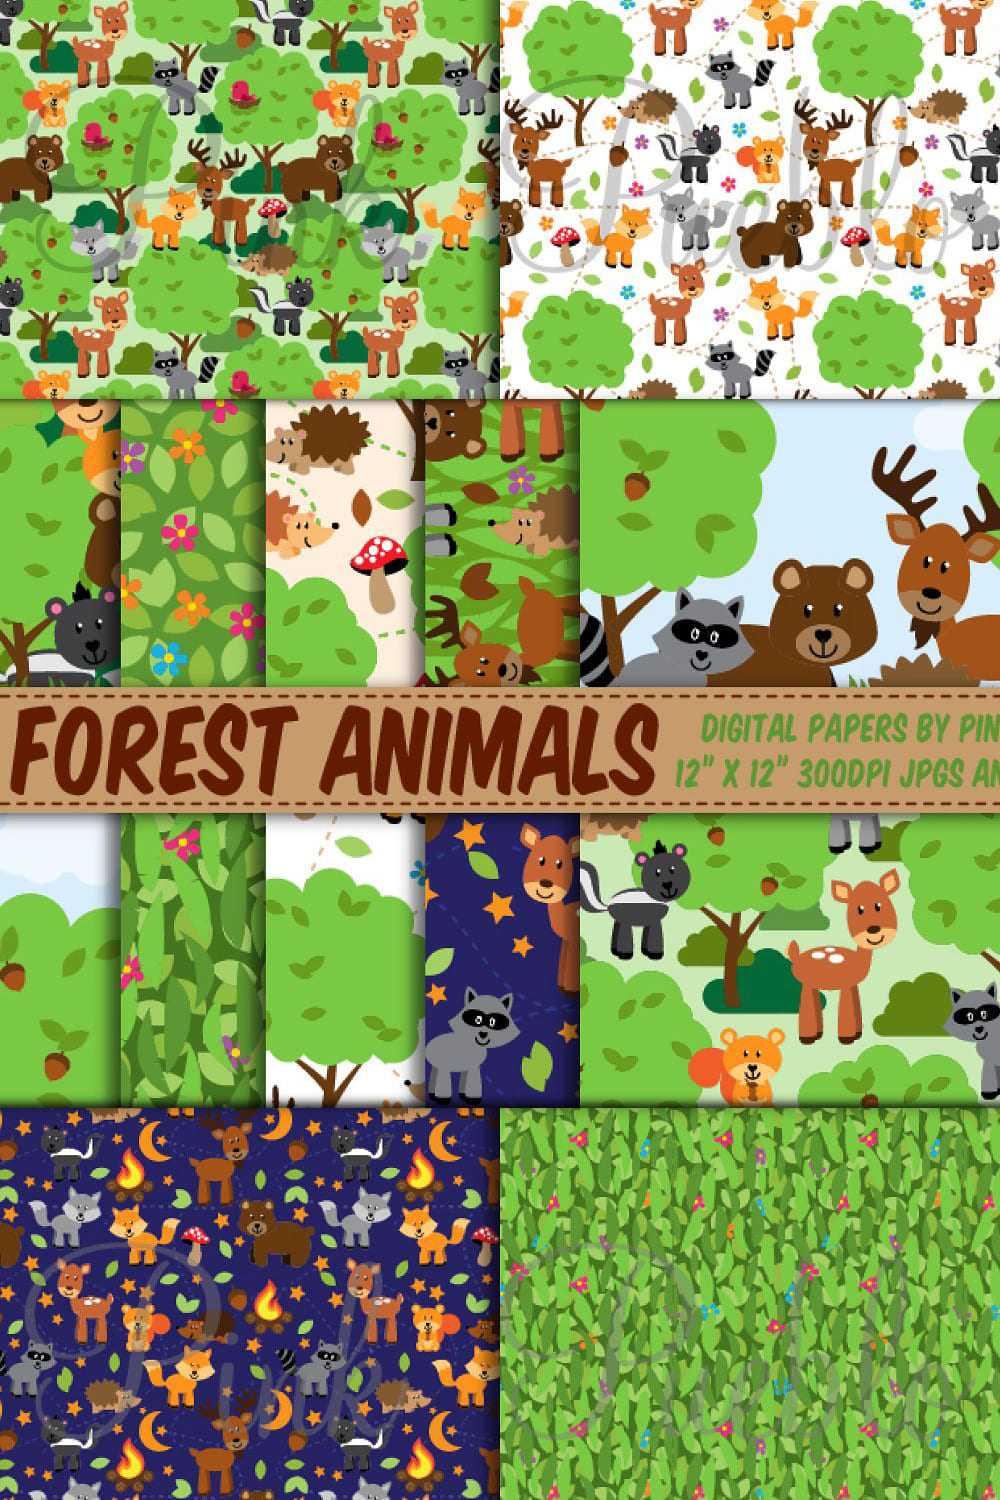 Diverse of wild animals in a forest.